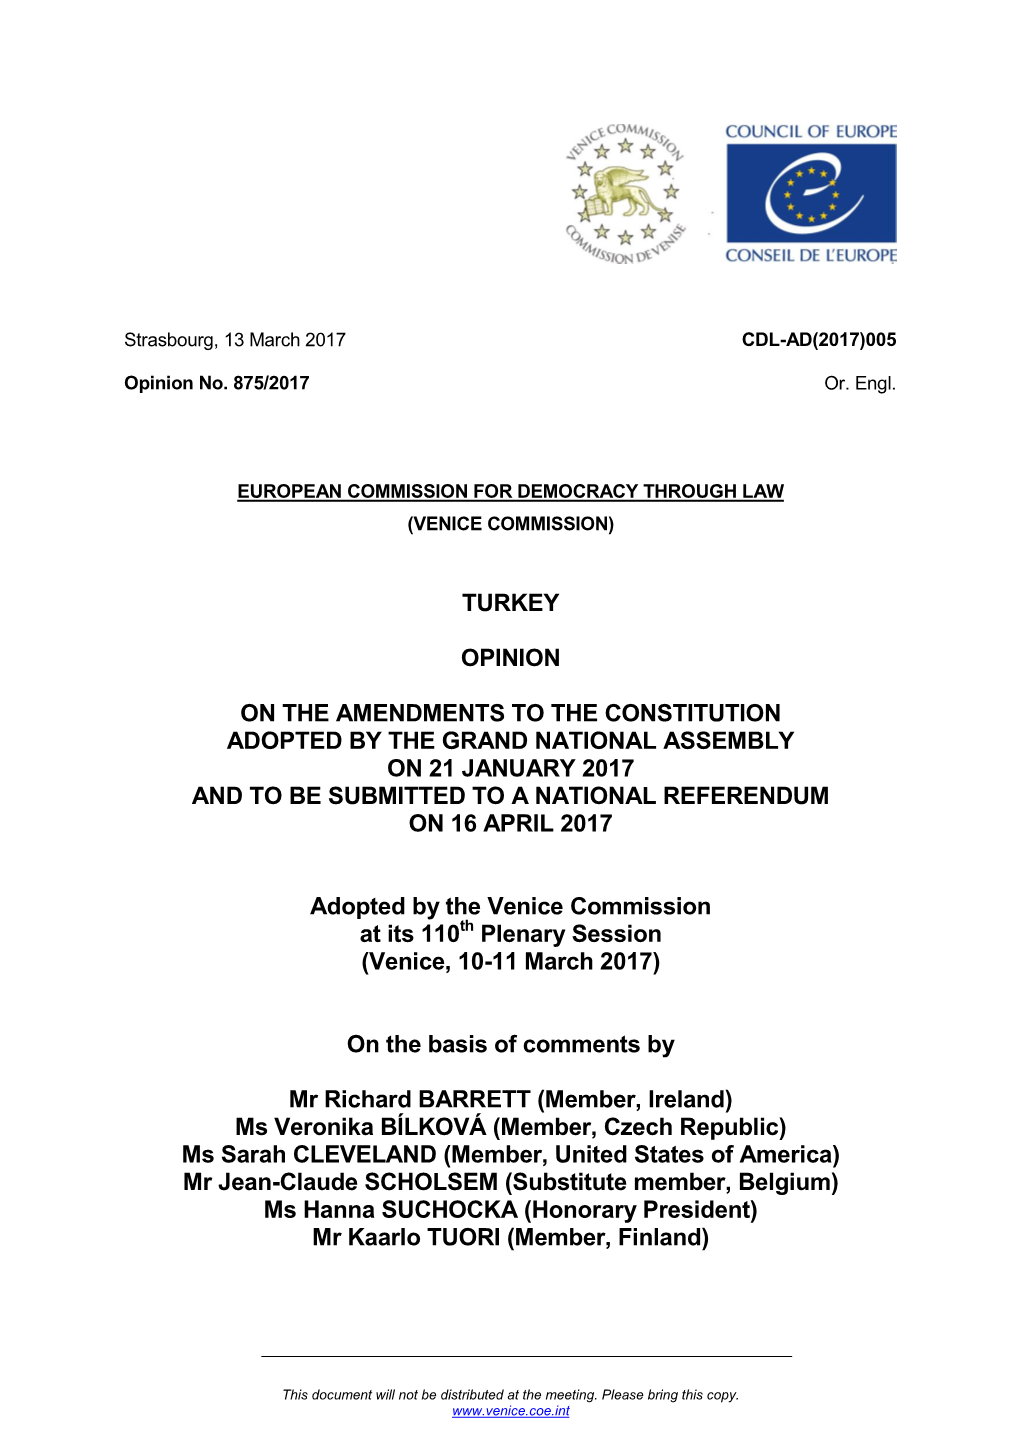 Turkey Opinion on the Amendments to The